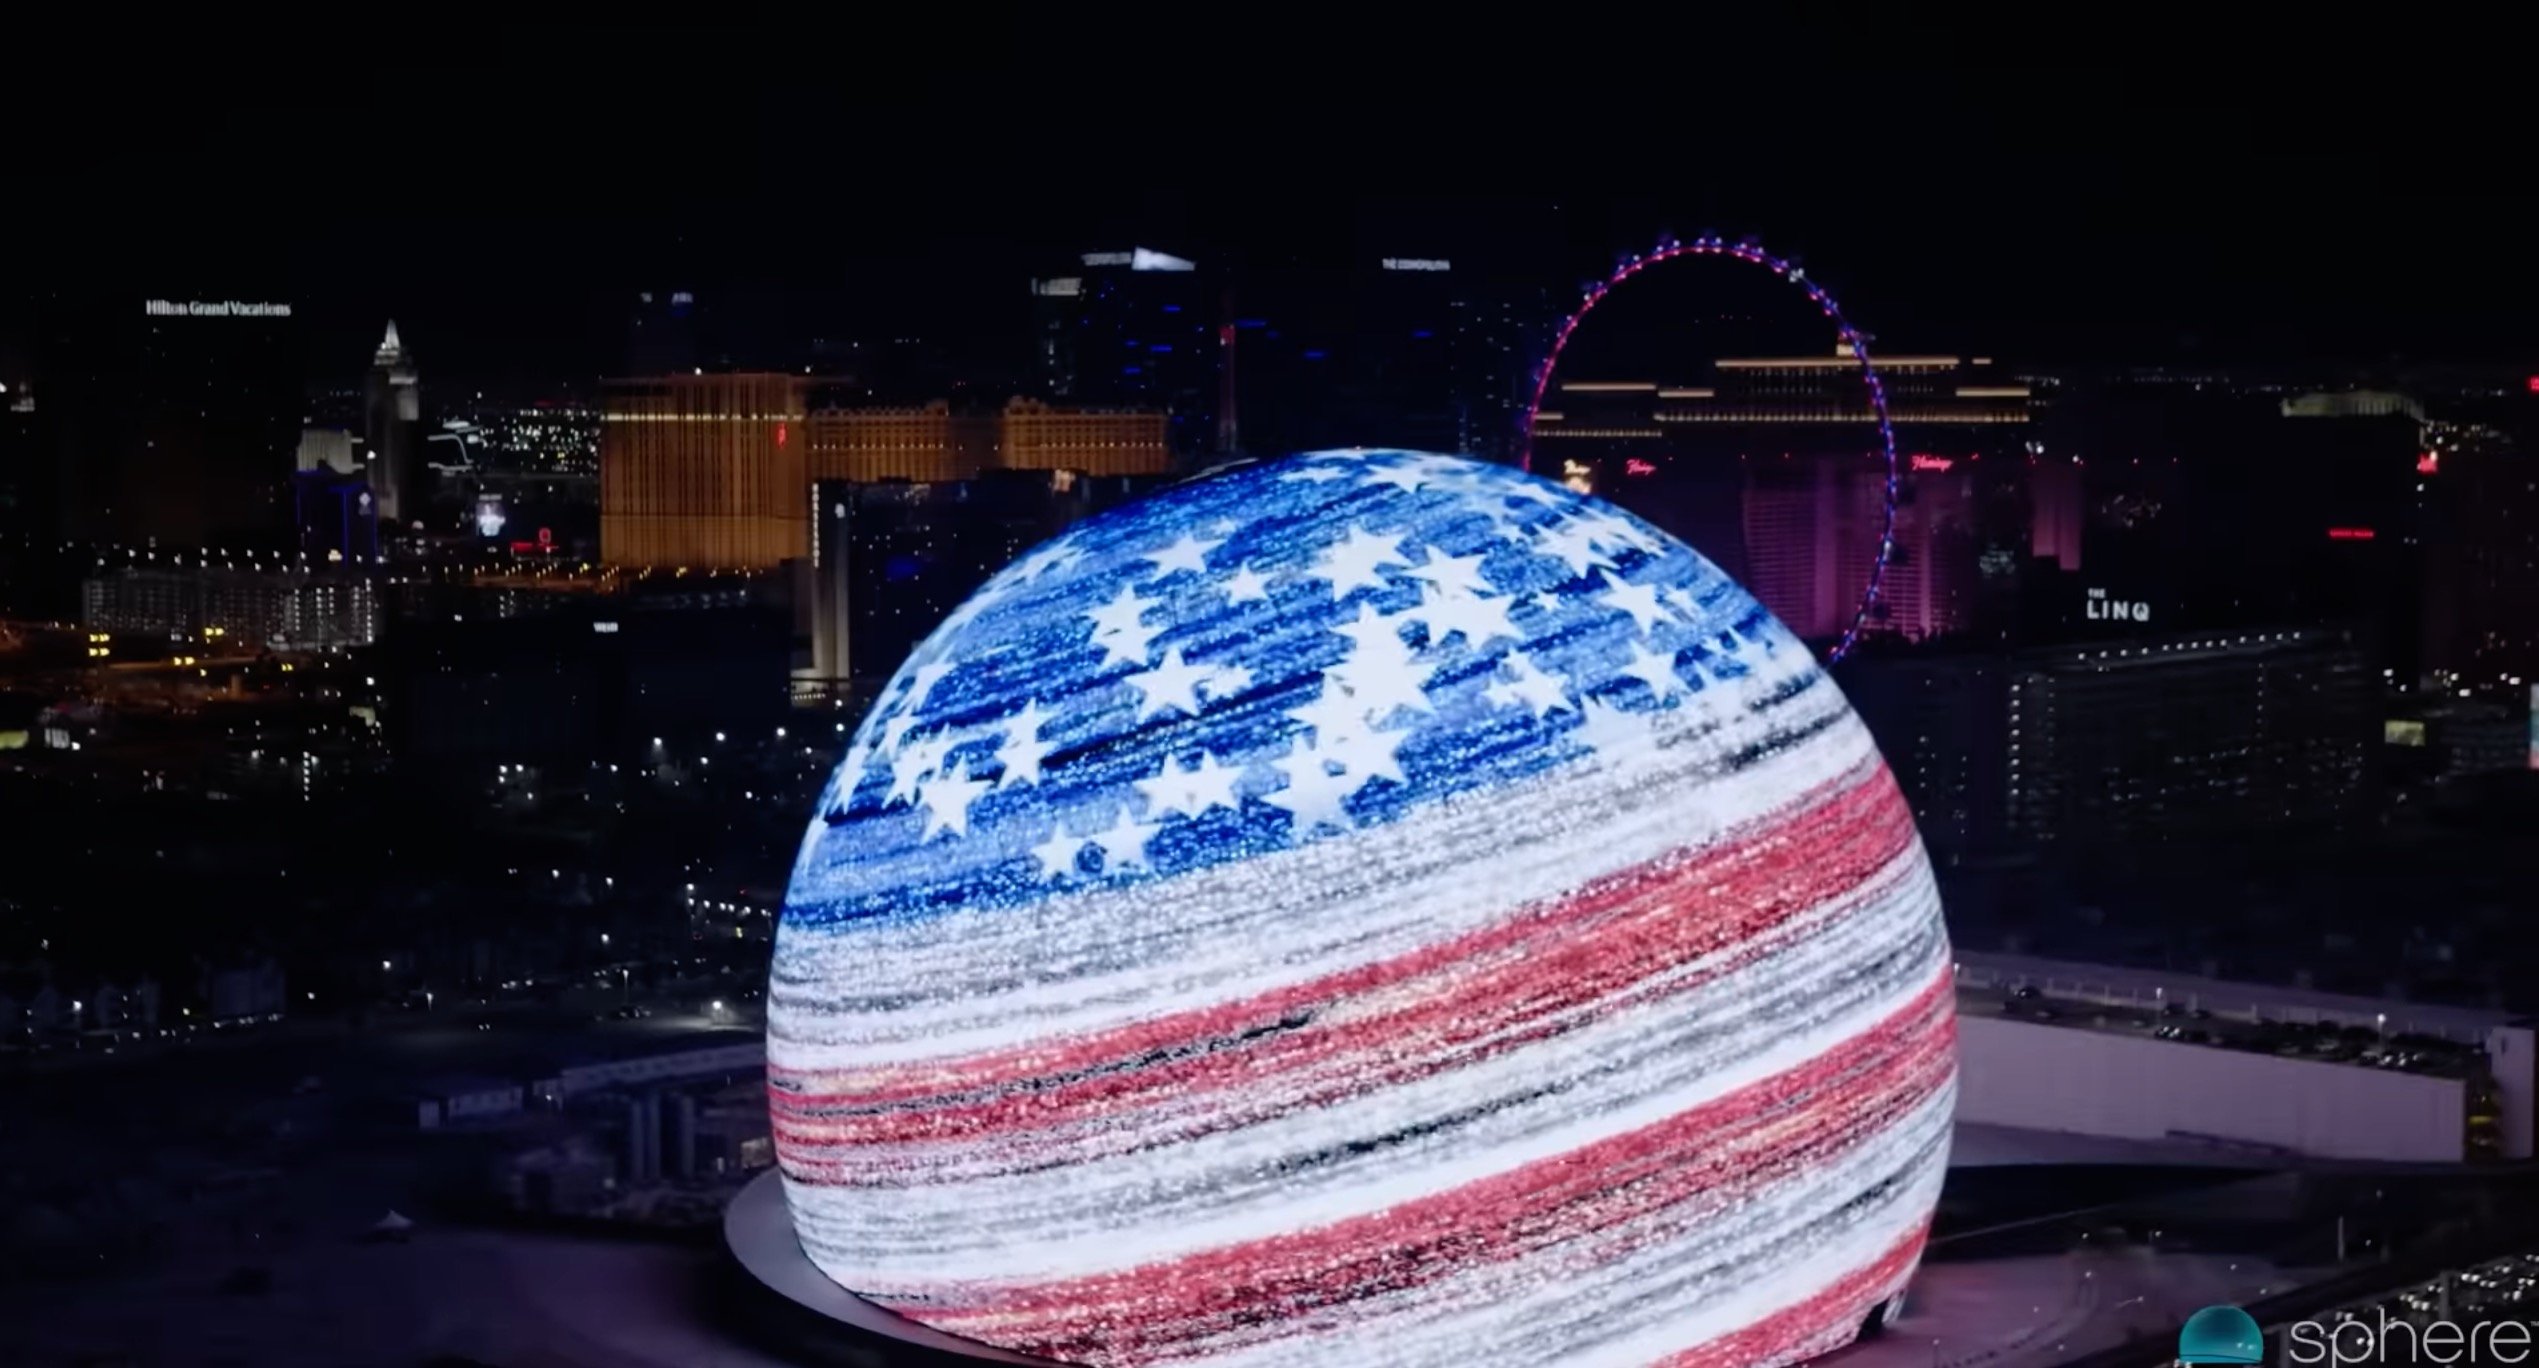 1.2 million LEDs for this giant sphere, Las Vegas offers itself one